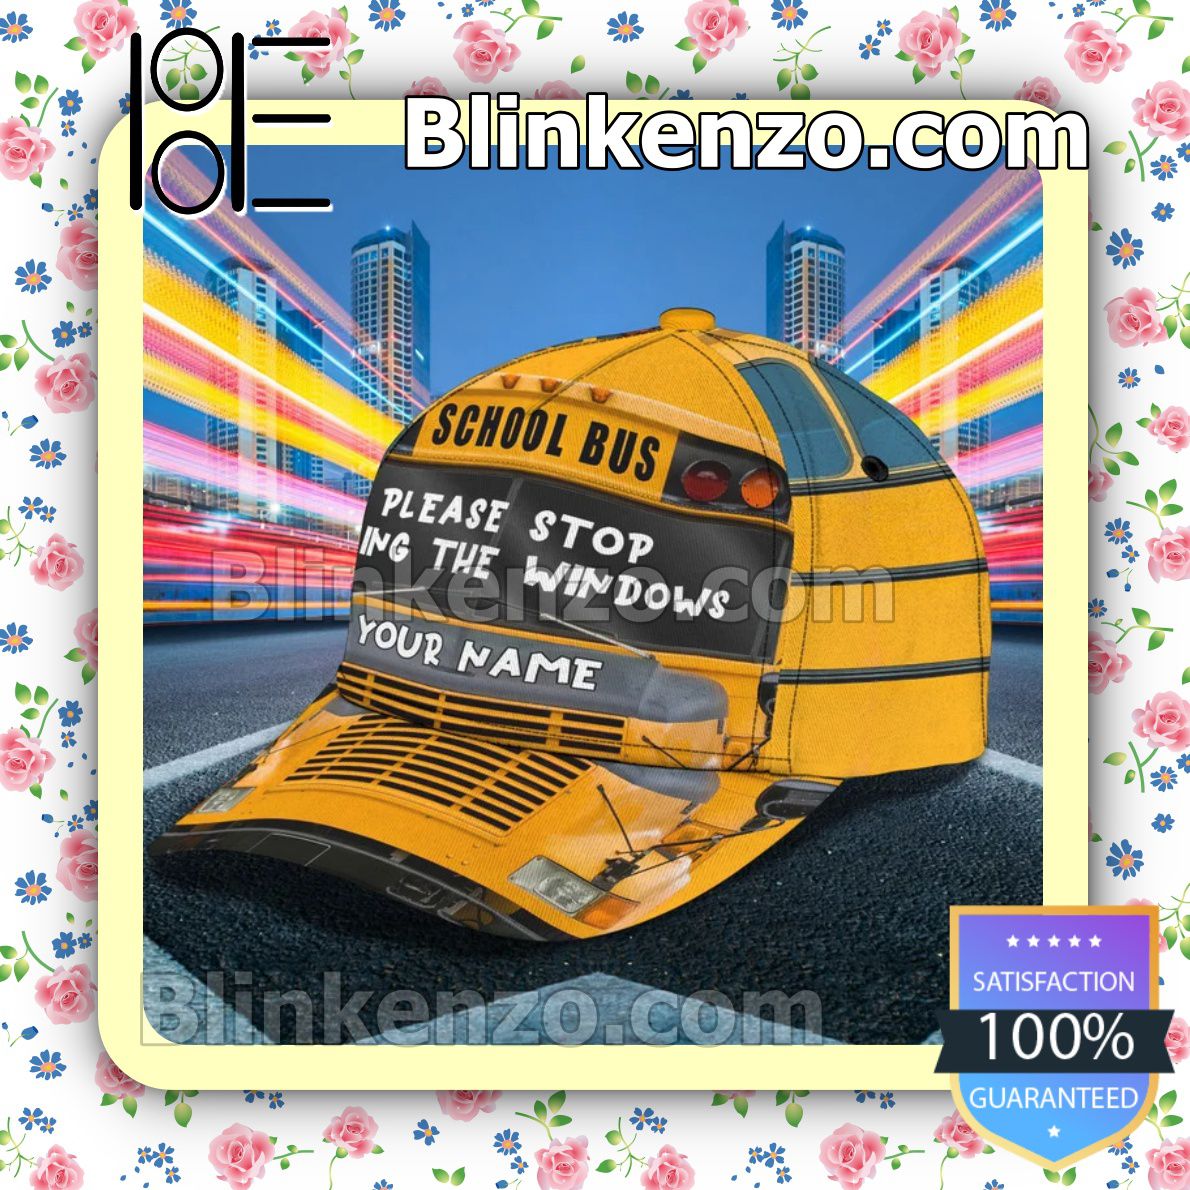 Handmade Personalized School Bus Please Stop Licking The Windows Baseball Caps Gift For Boyfriend